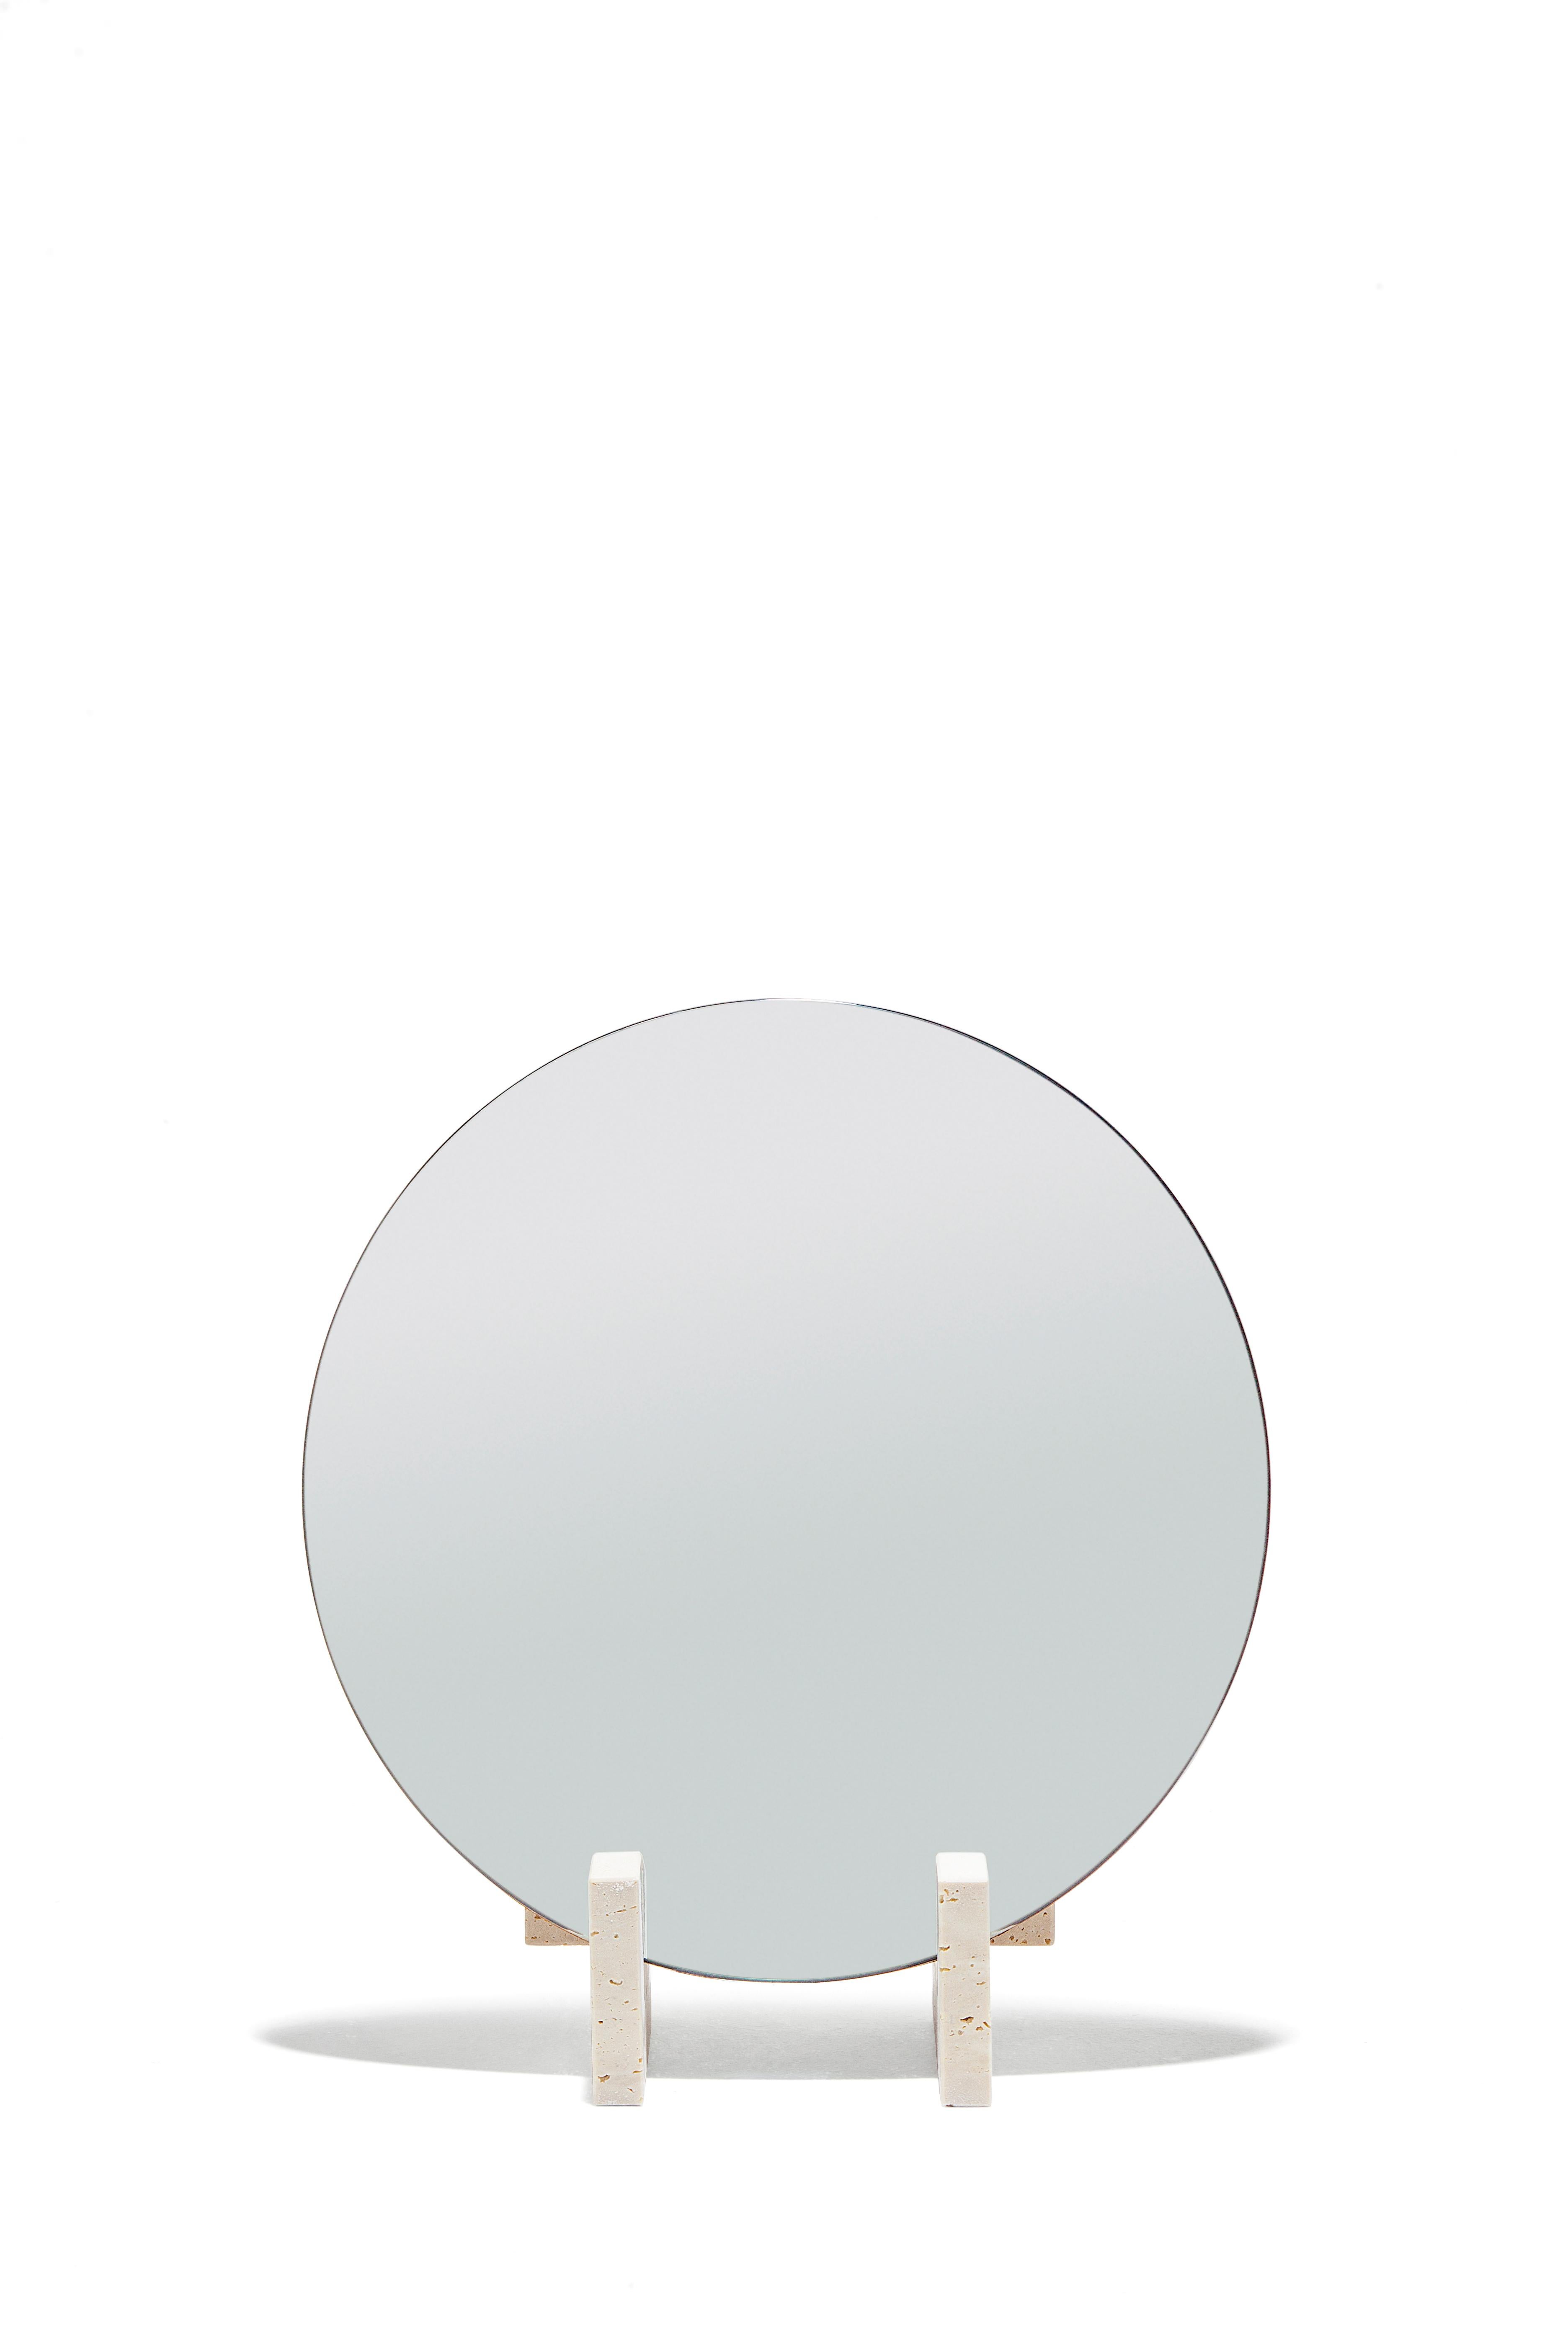 The Fit Mirror is a minimalist style mirror consisting of three treated Travertine marble pieces as a base. The back part of the mirror is made of a rusty iron plate and treated with special oils for its preservation.
Josep Vila Capdevila, head